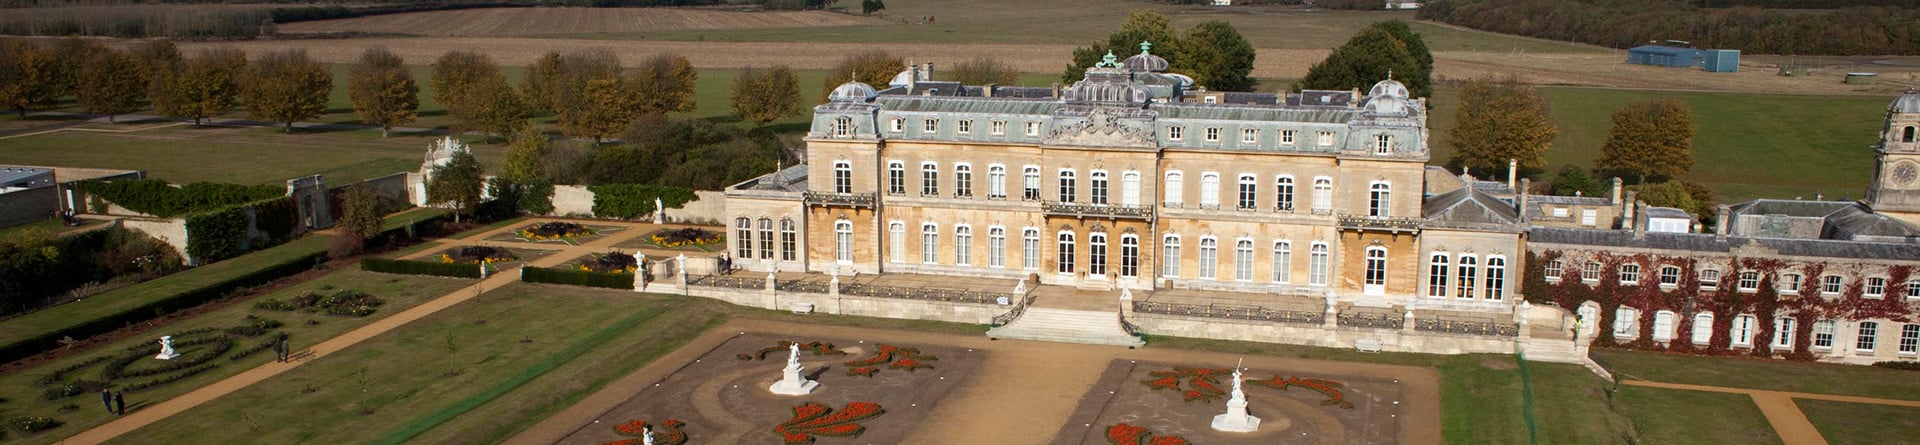 Low level, colour aerial photograph showing a grand country house and gardens with formal planting and statues